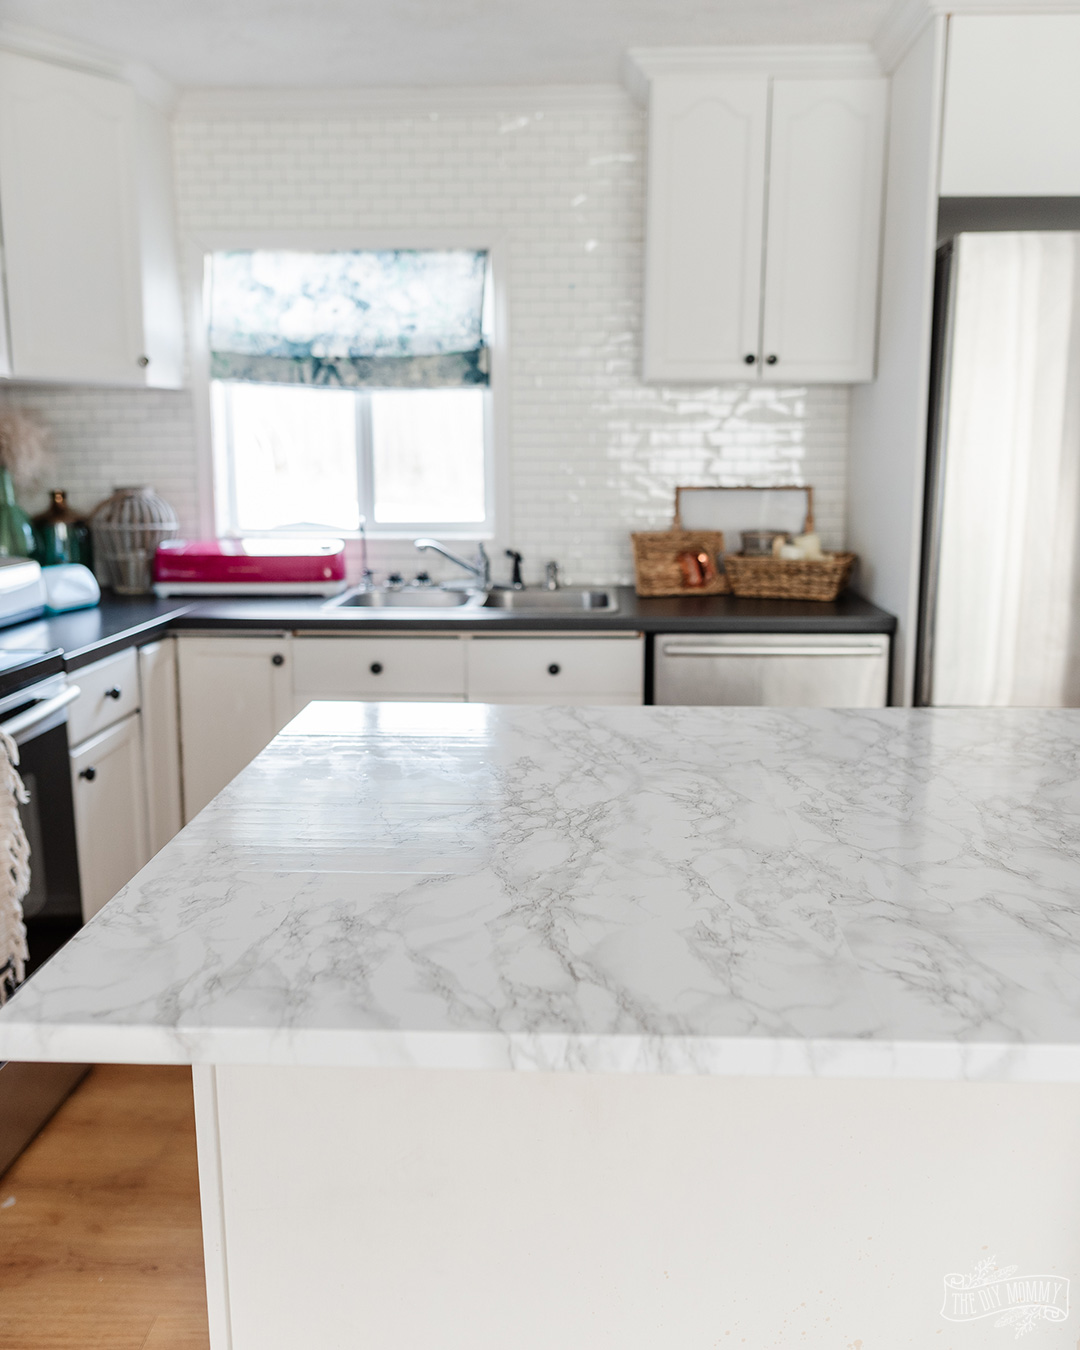 Learn how to install contact paper countertops step by step, everything you need to know, and my best tips and tricks